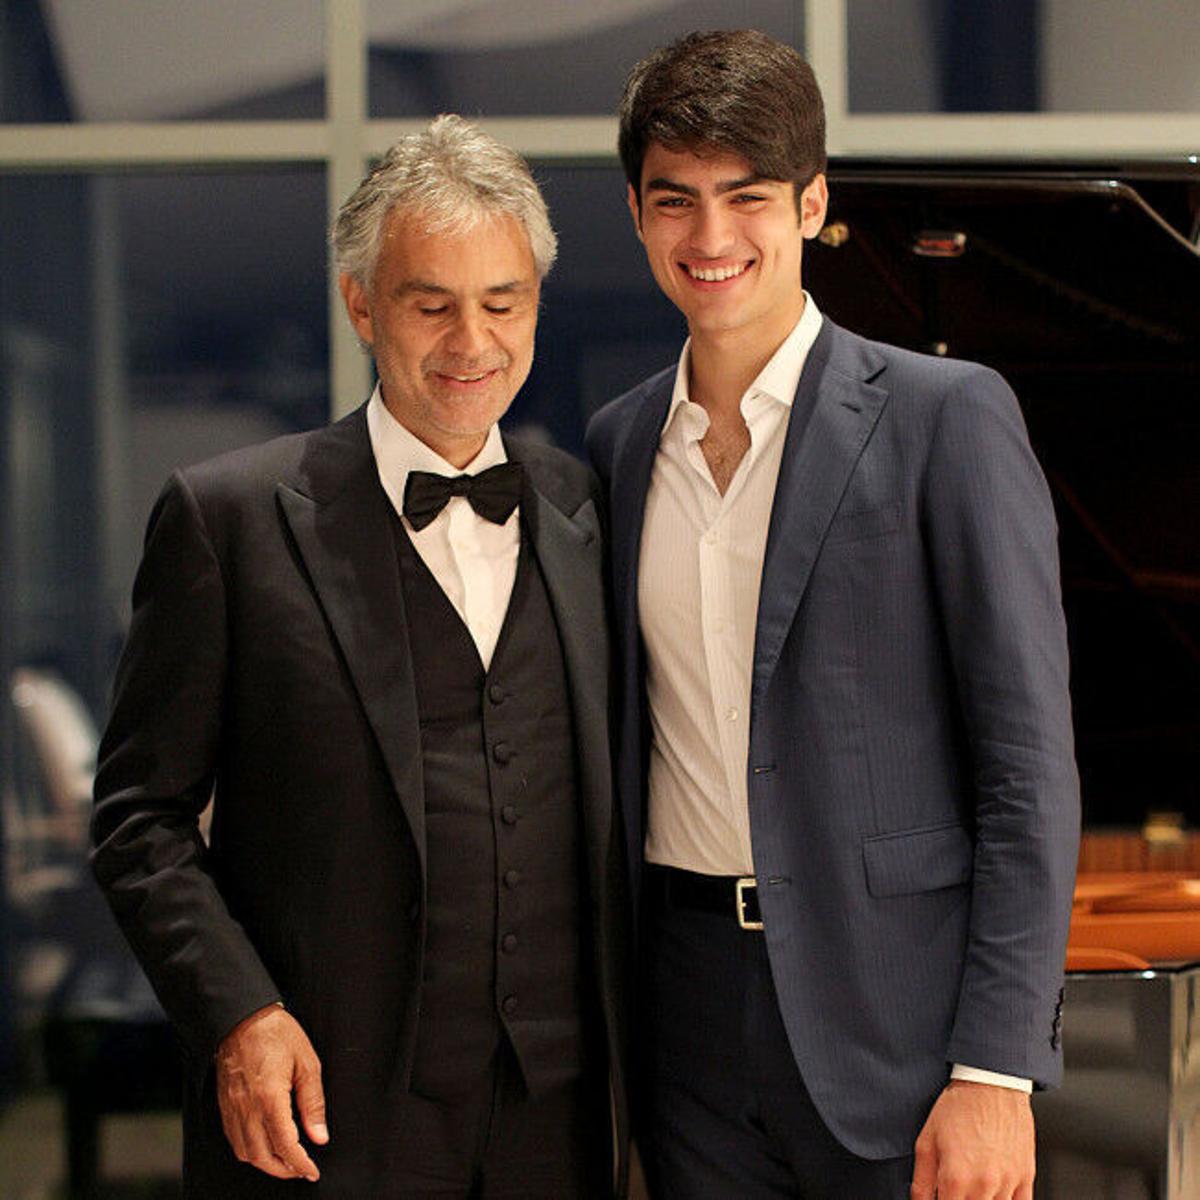 Andrea Bocelli got married to his manager and it was just lovely